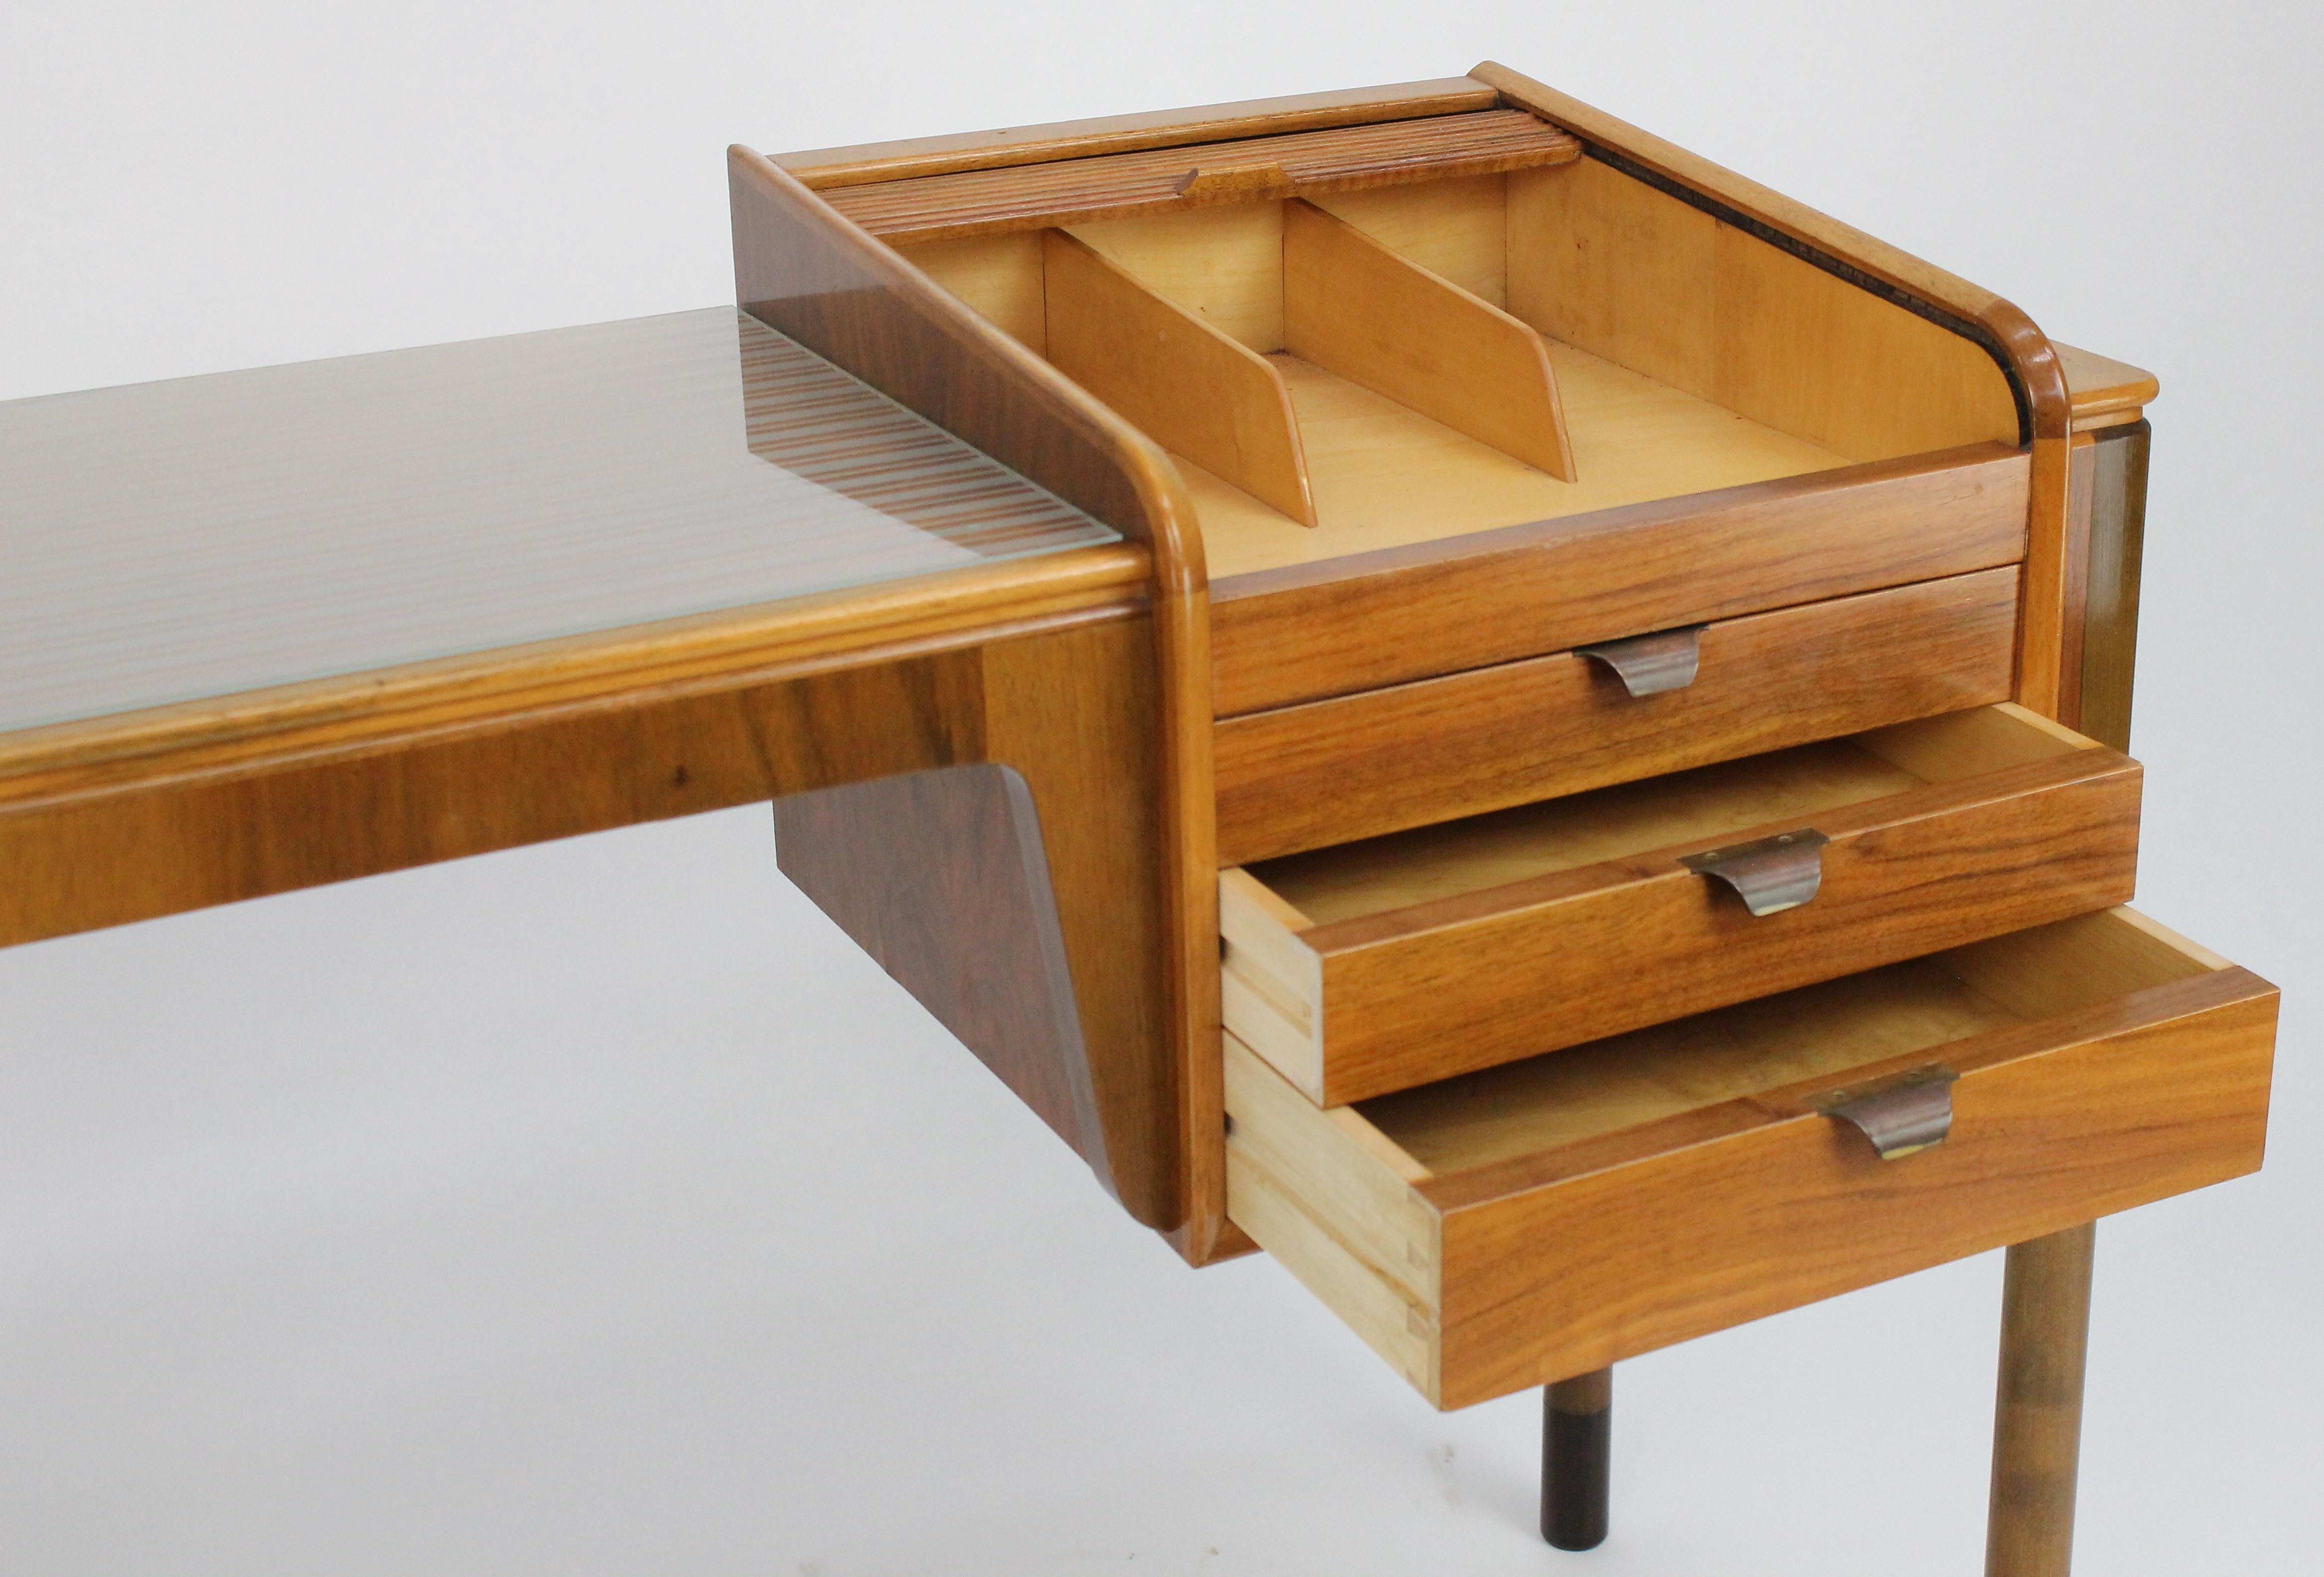 20th Century Dressing Table or a Small Writing Desk, Swedish 1940s-1950s by Carl-Axel Acking